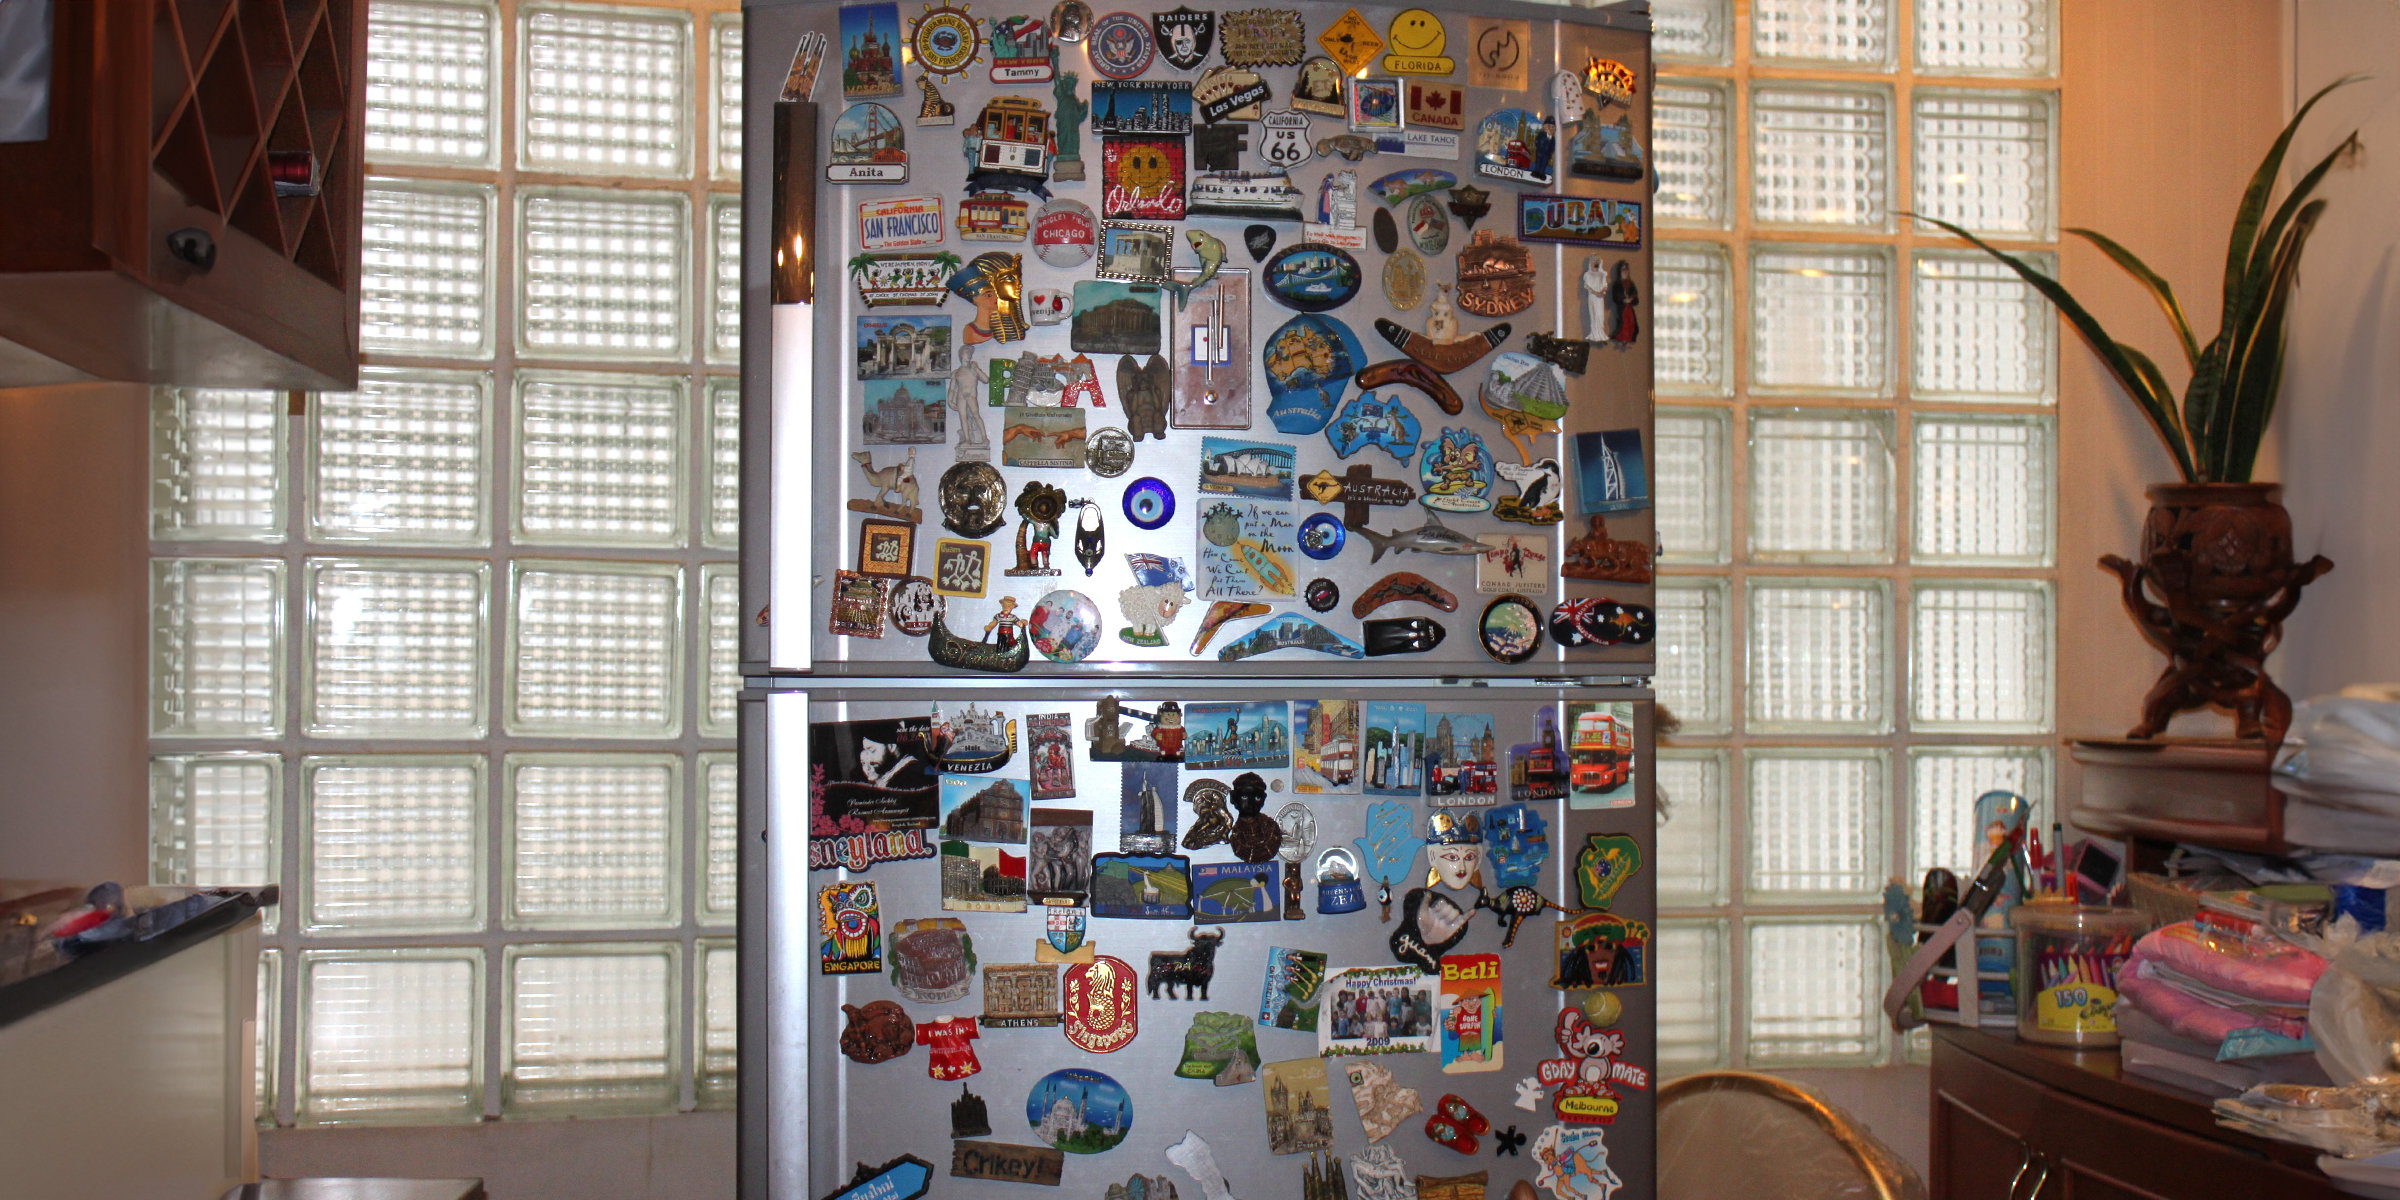 A fridge covered in magnets | Source: Flickr.com/nist6ss/CC BY-SA 2.0